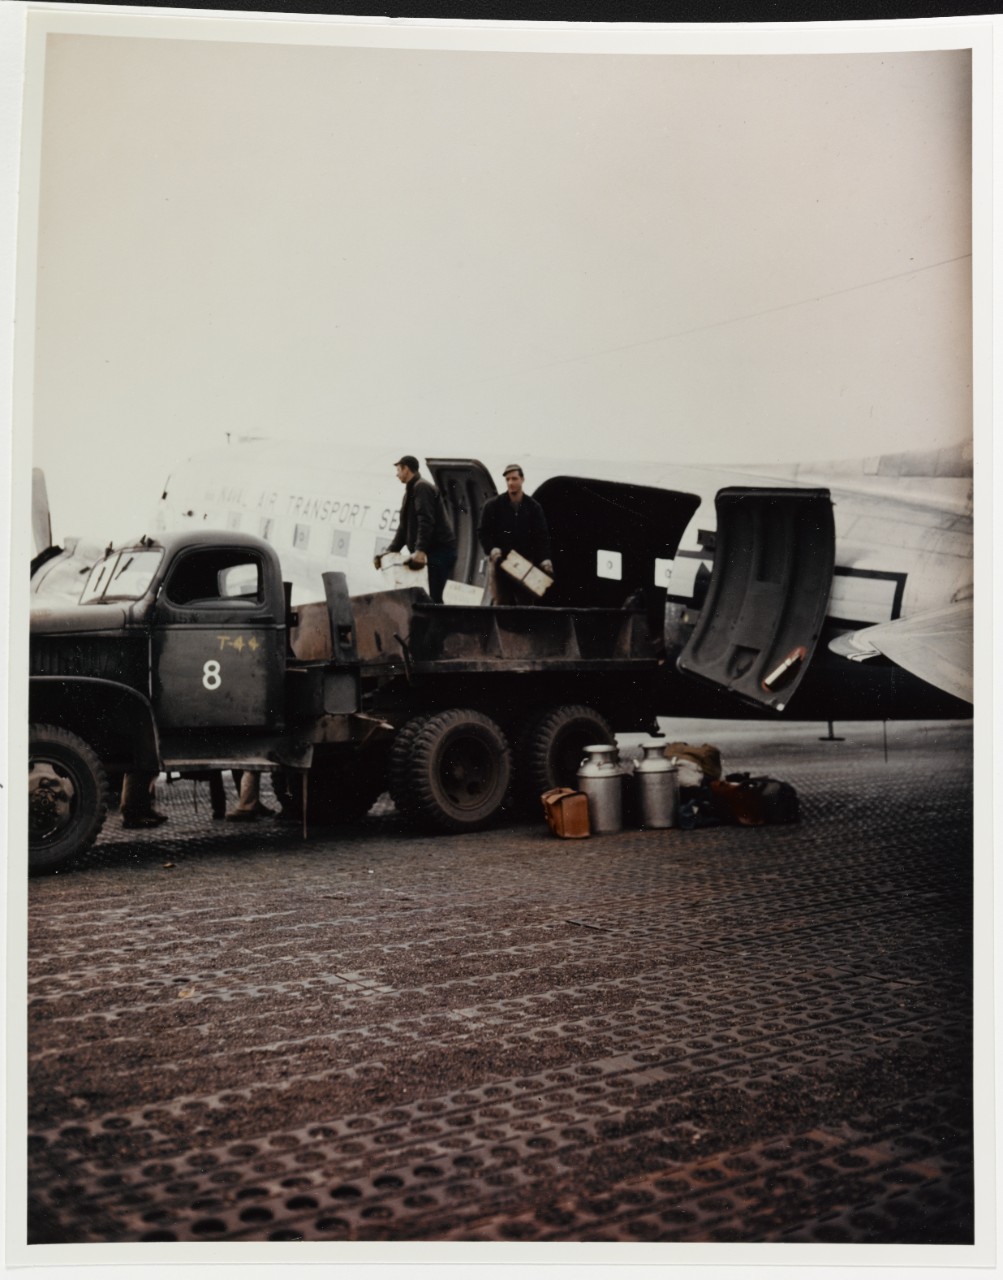 DOUGLAS R4D-6 Aircraft (Bu# 17265), of Naval Air Transport Service Squadron VR-5 being unloaded at an Alaskan airfield